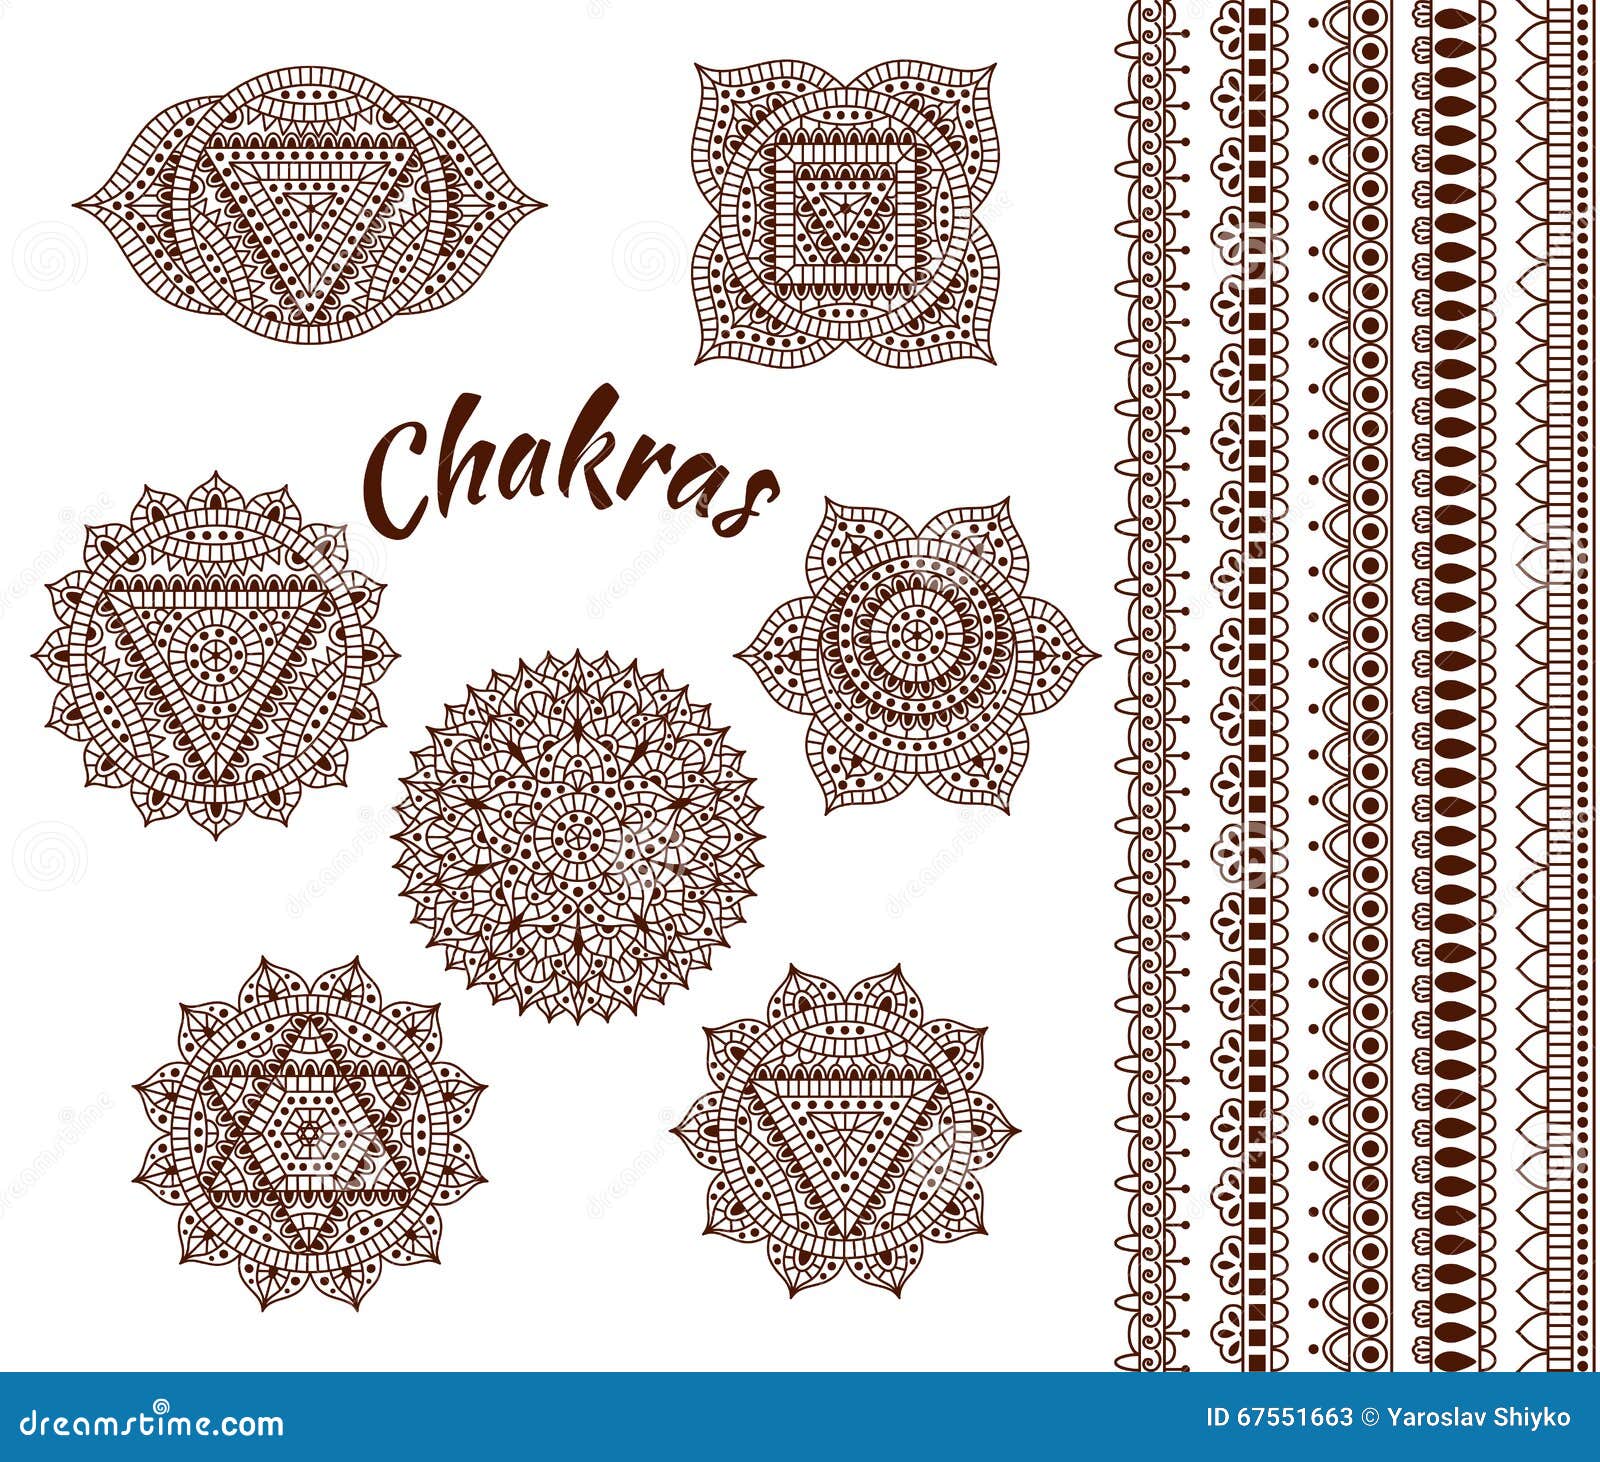 Set Of Seven Chakras Oriental Ornaments And Borders For Henna Tattoo And For Your Design Buddhism Decorative Elements Vector Il Stock Vector Illustration Of Green Doodle